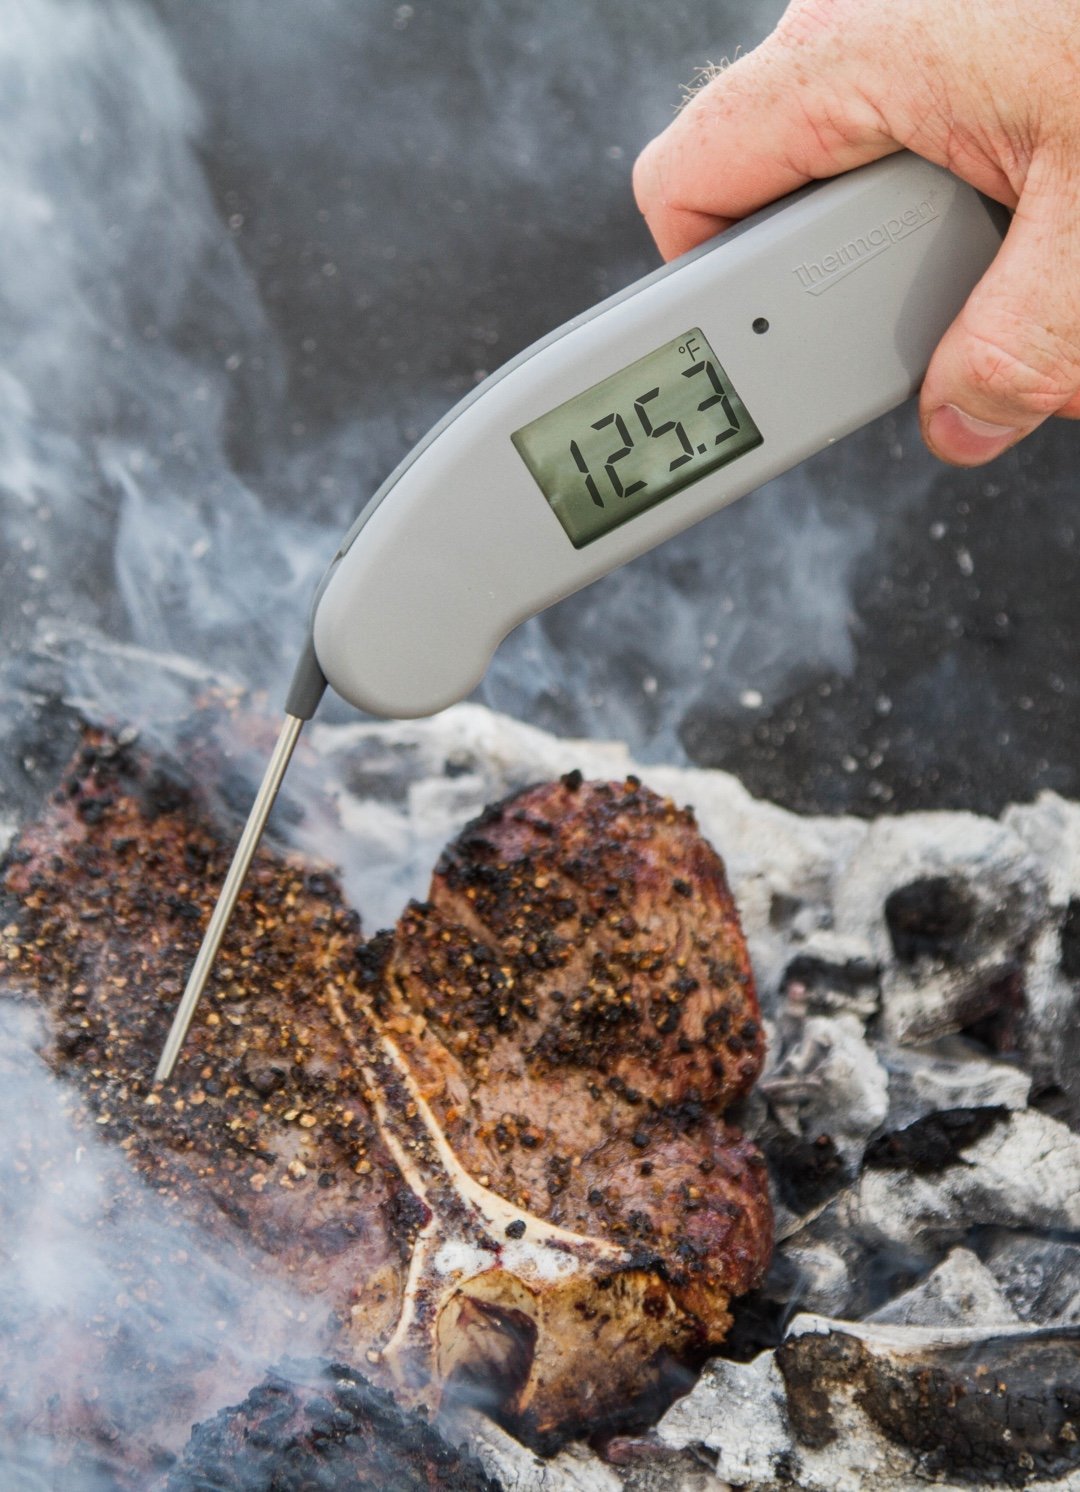 ThermoWorks: $69 Thermapen Mk4 Closeout Sale